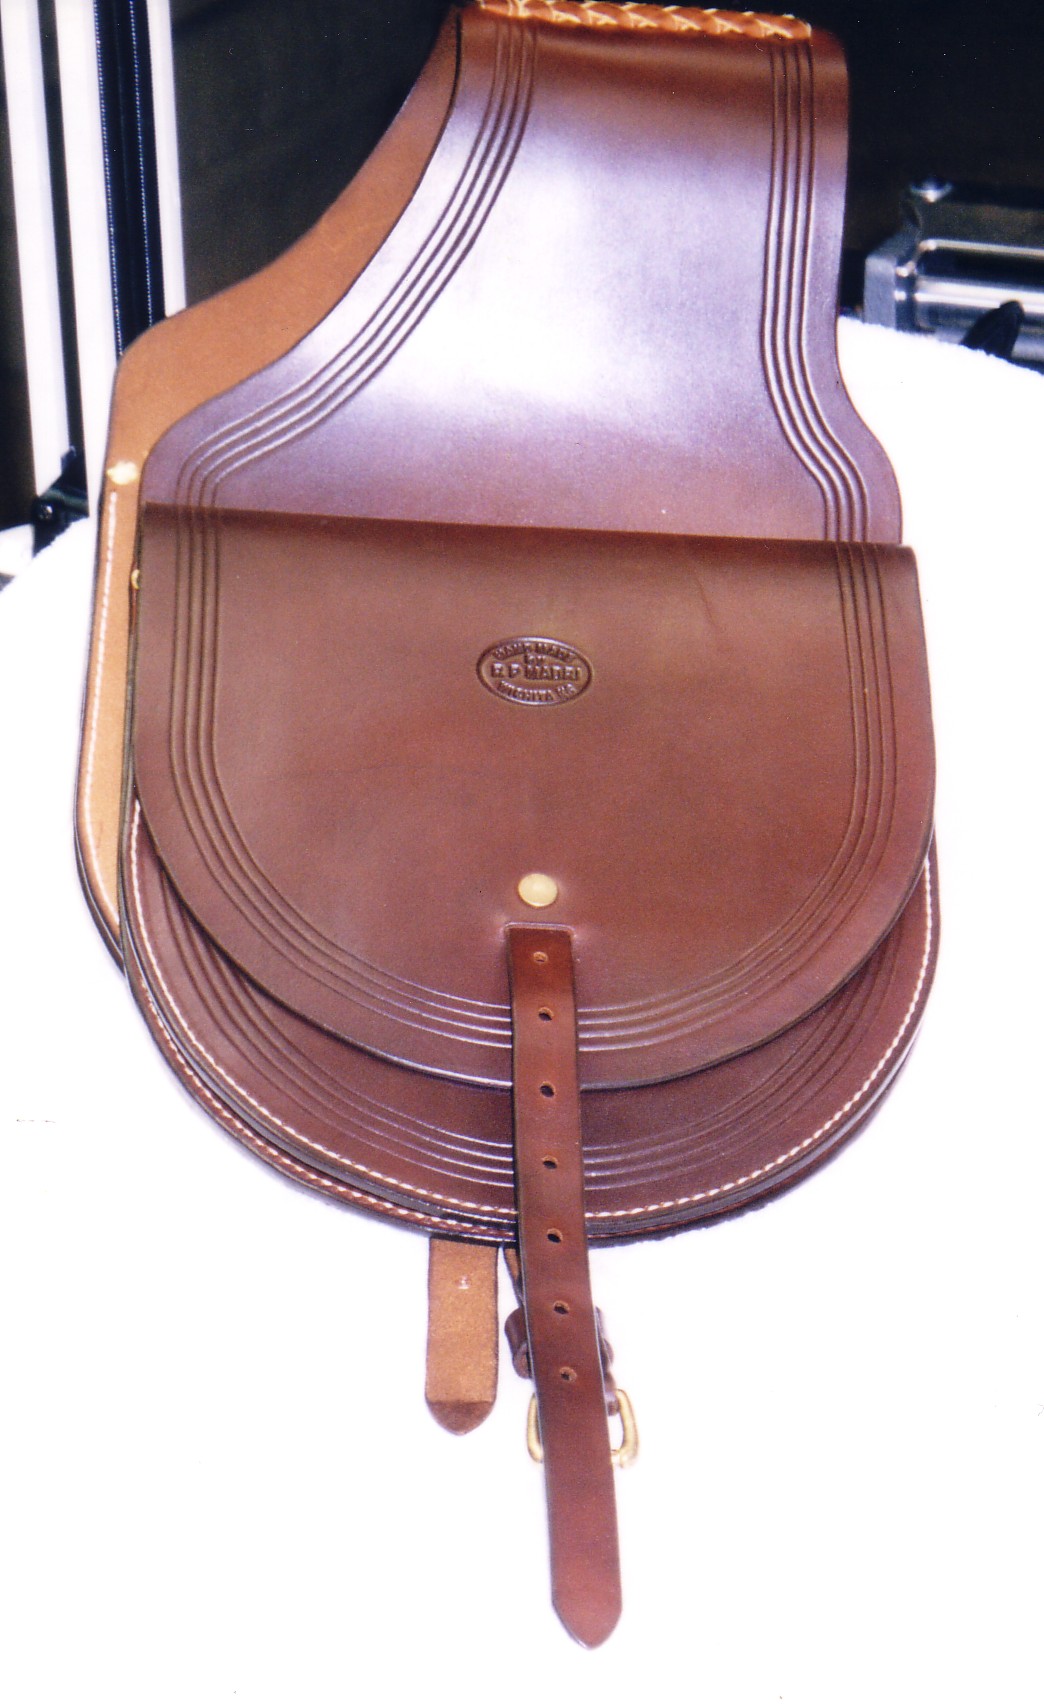 Leather Saddle Bags: Gray Design